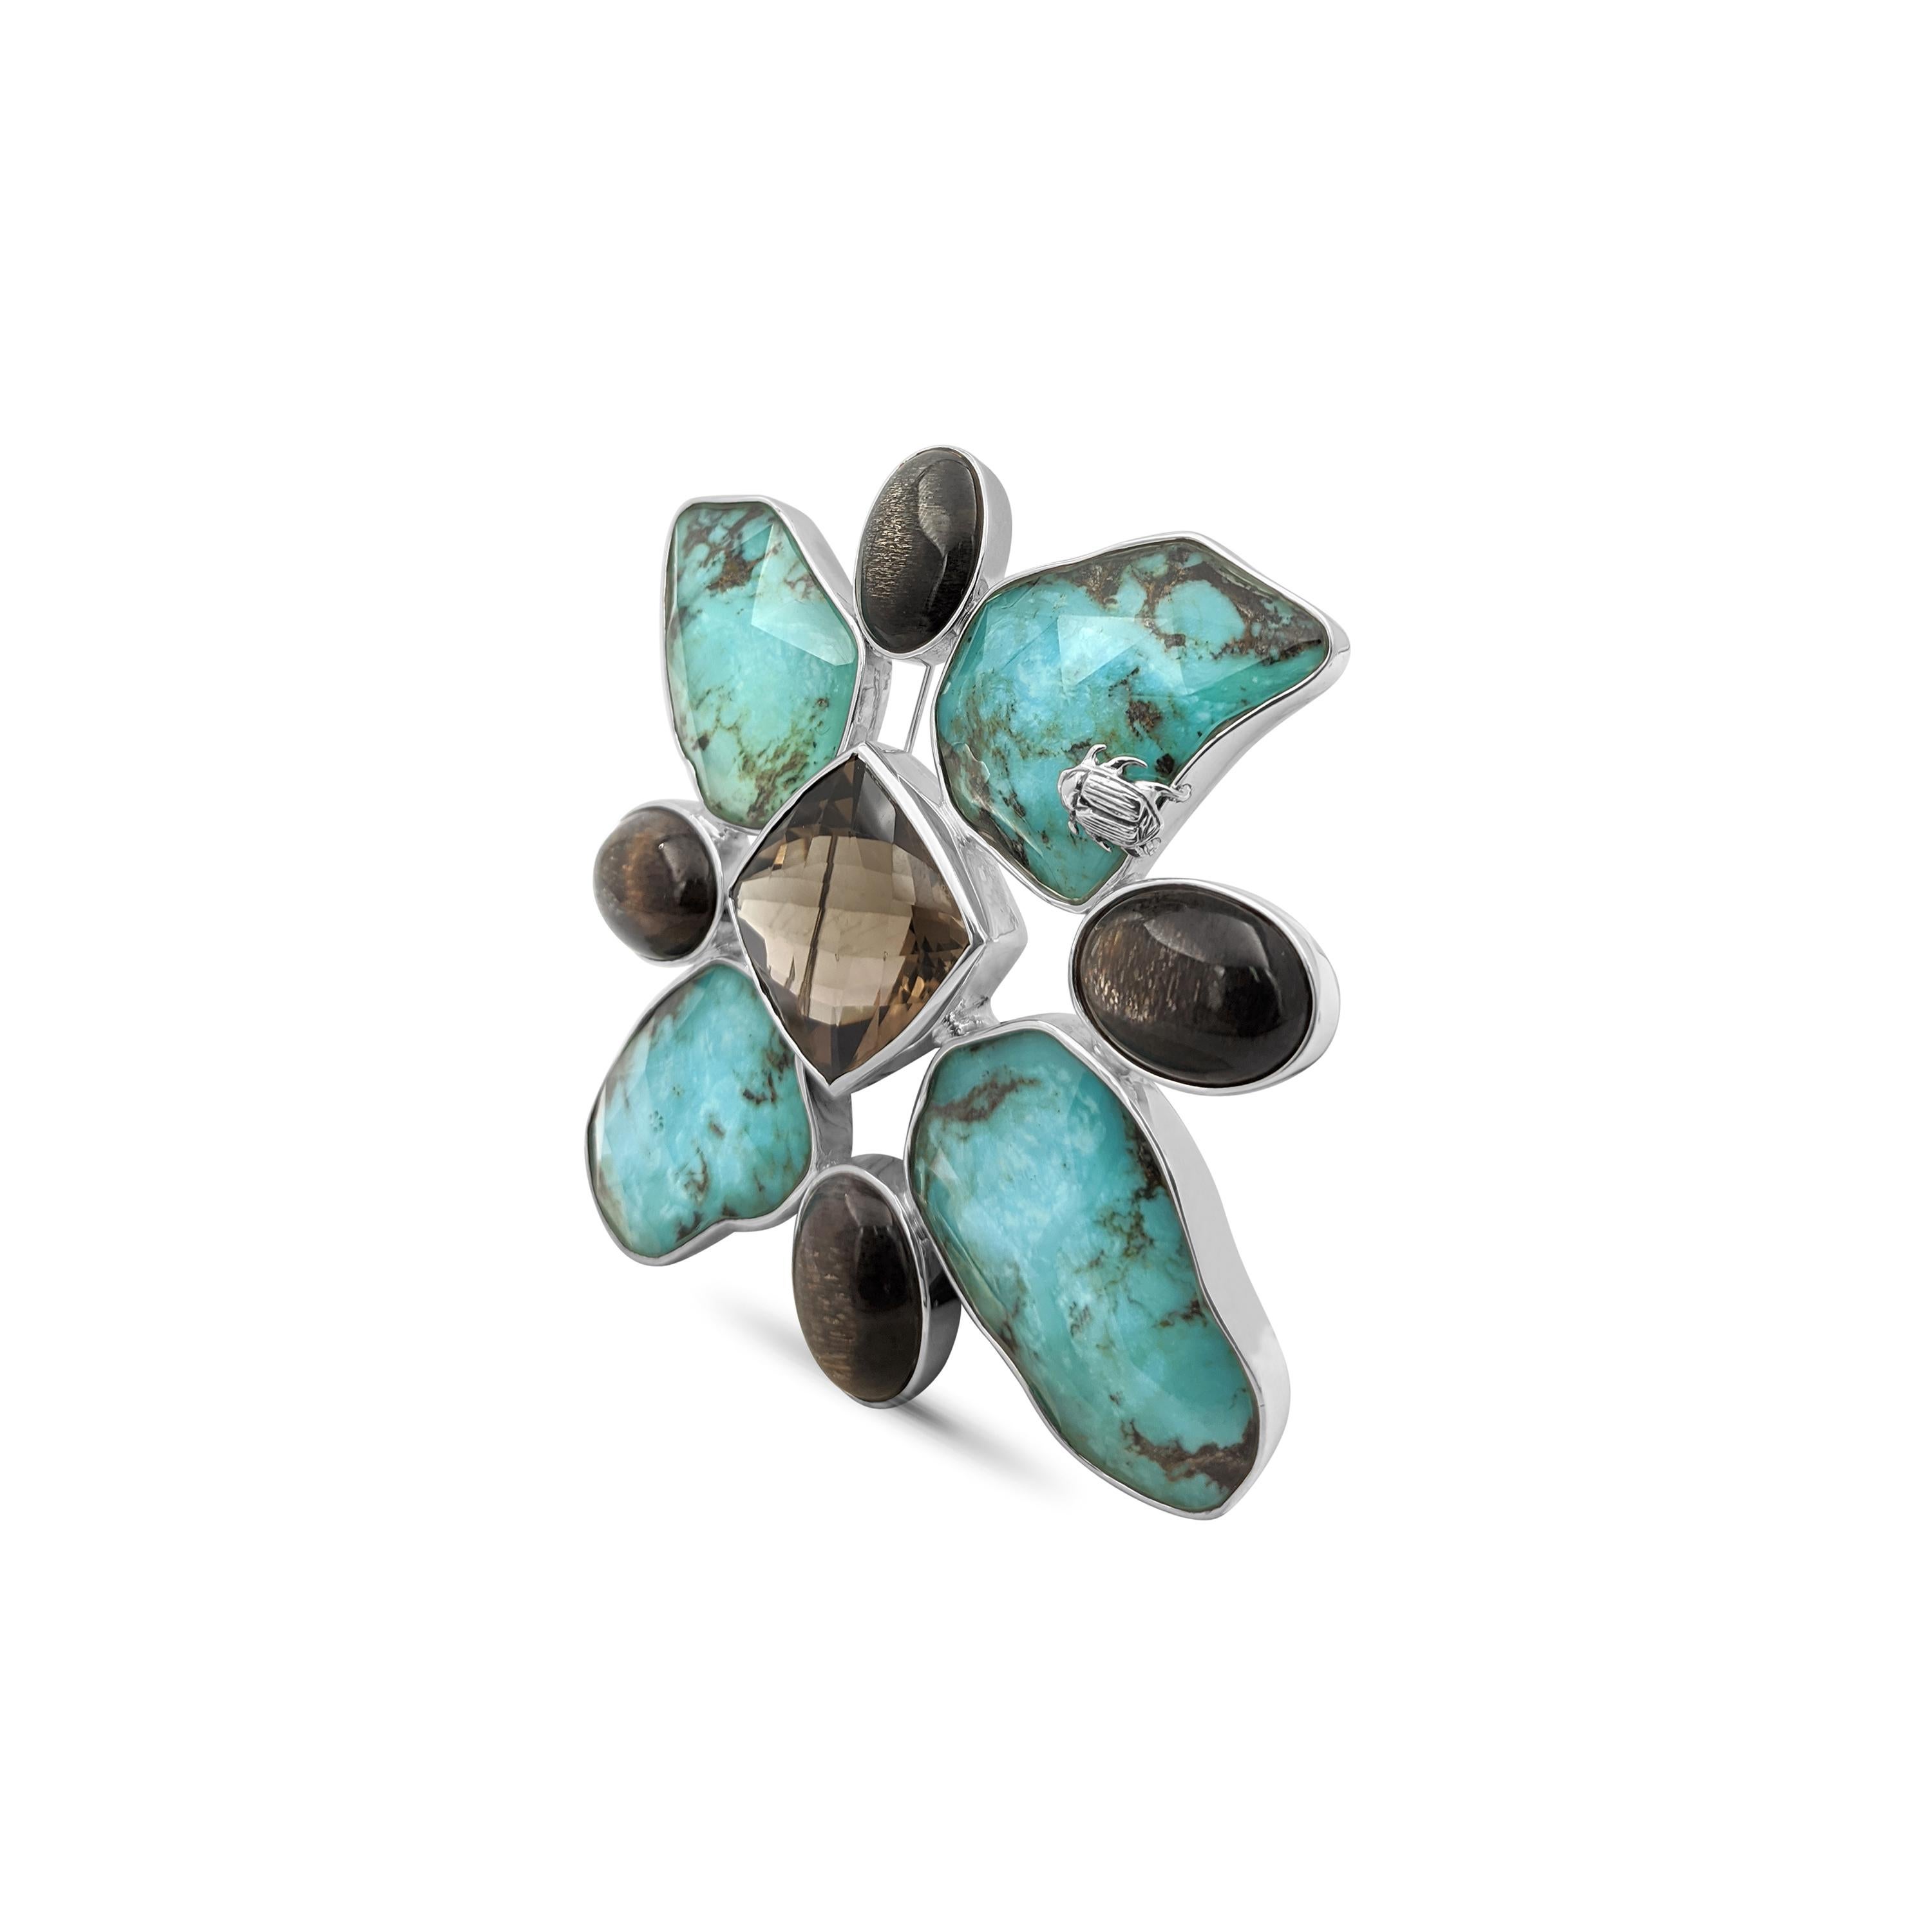 • Stephen Dweck One of a Kind of Stephen Collection  
• 925 Sterling Silver
• 3.5” X 3.5”

Behold the breathtaking beauty of Stephen Dweck's latest masterpiece, the One of A Kind American Turquoise Natural Quartz Sunstone Smoky Quartz Maltes Pin in